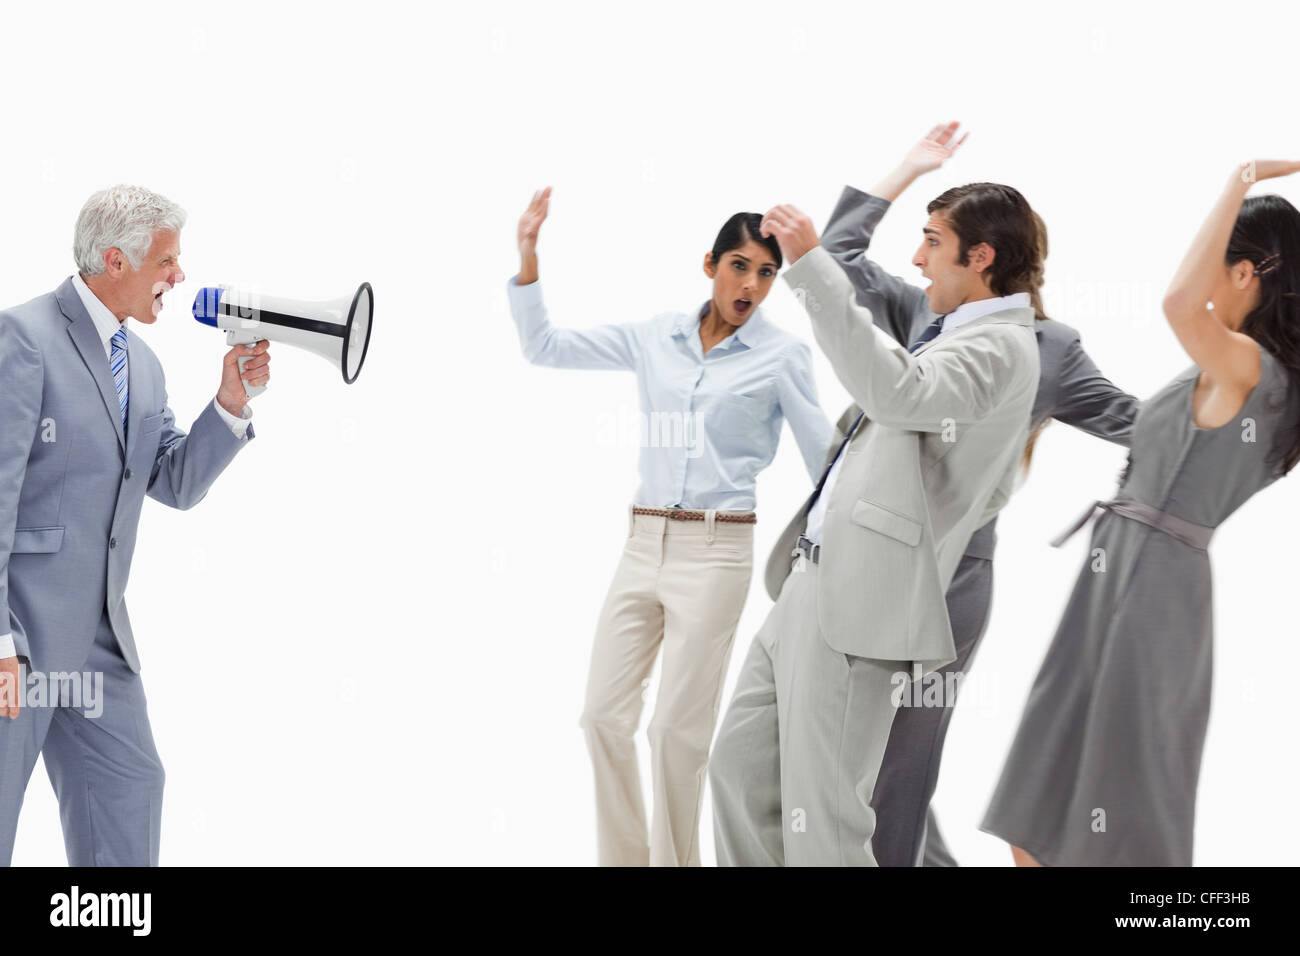 Man yelling in a megaphone at business people Stock Photo